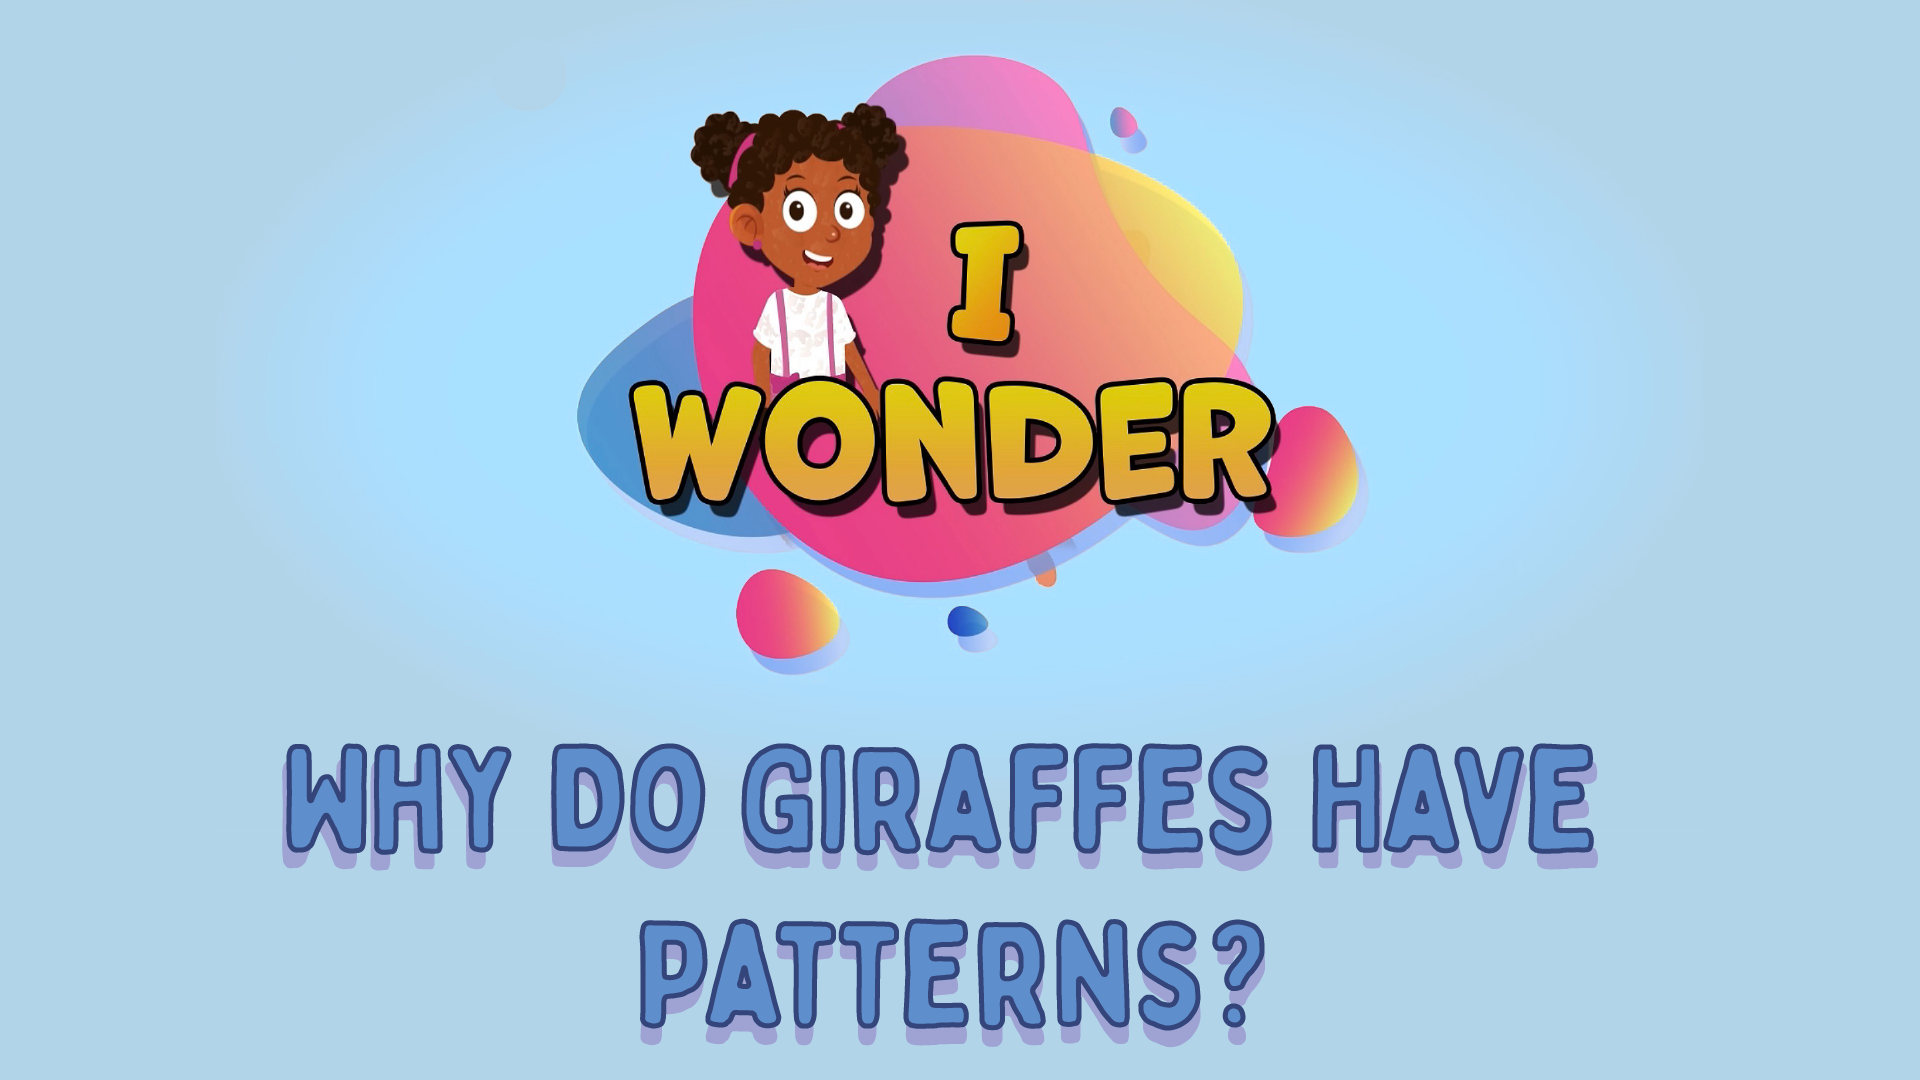 Why Do Giraffes Have Patterns?